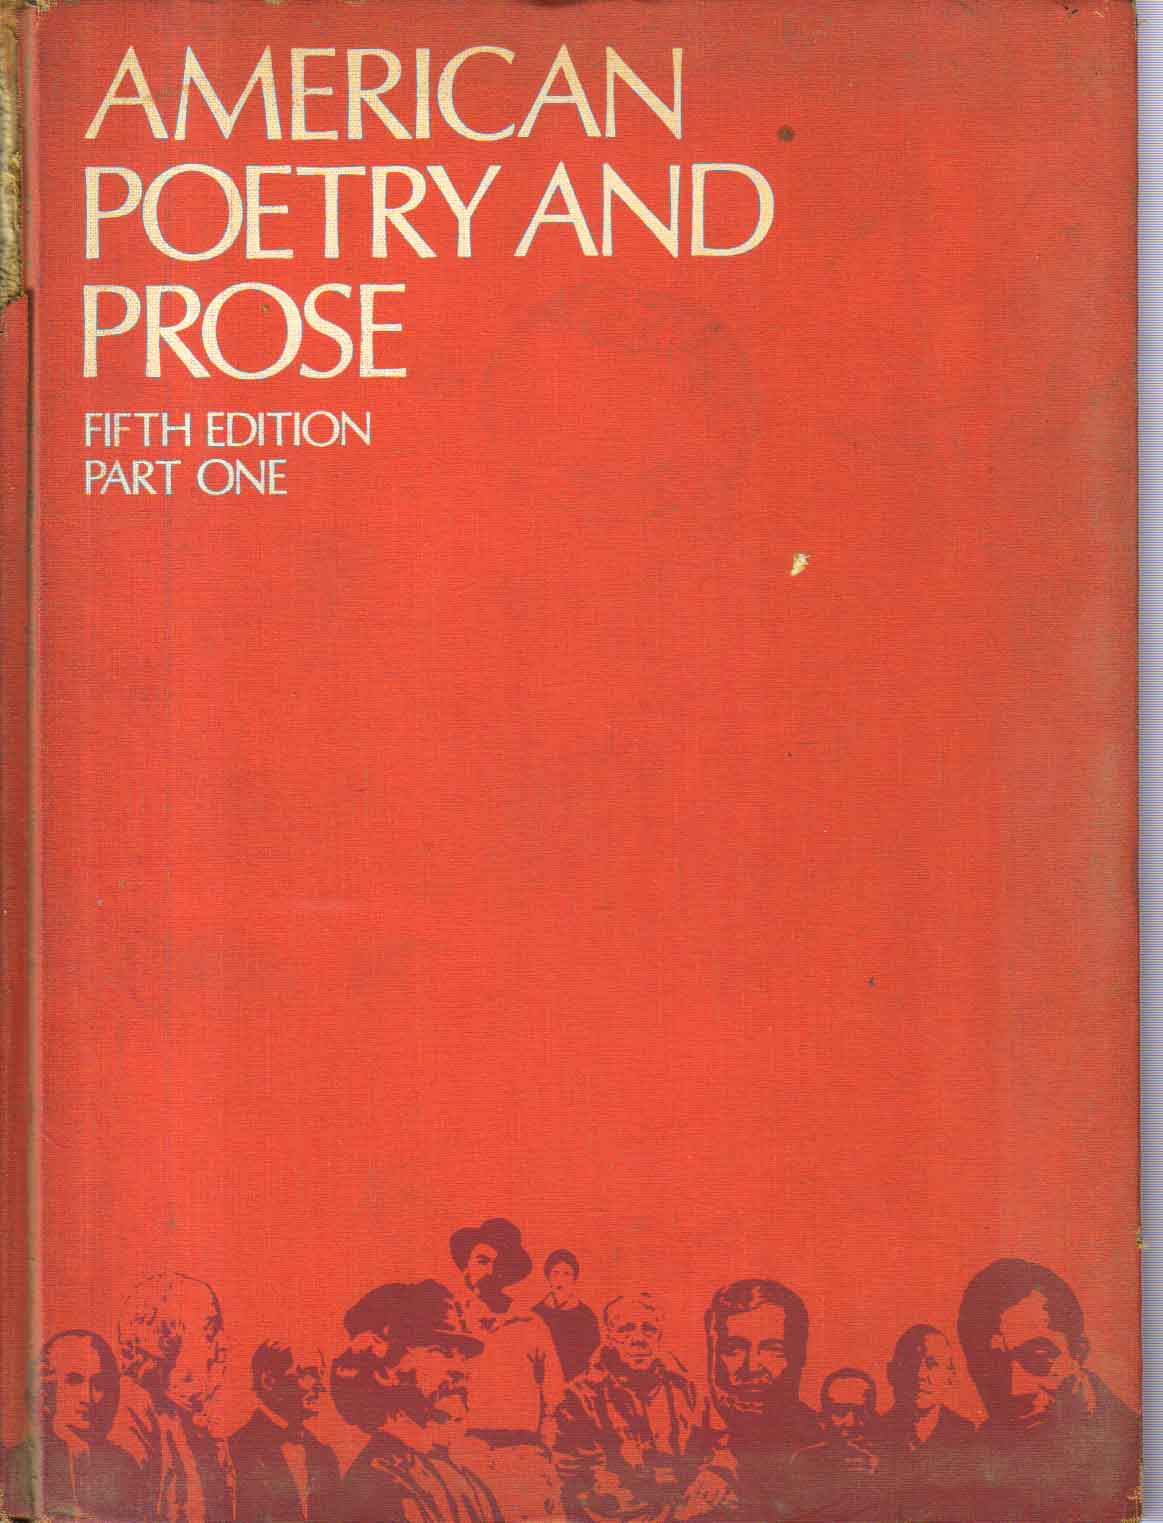 American Poetry & Prose Part One from the beginnings to 1865